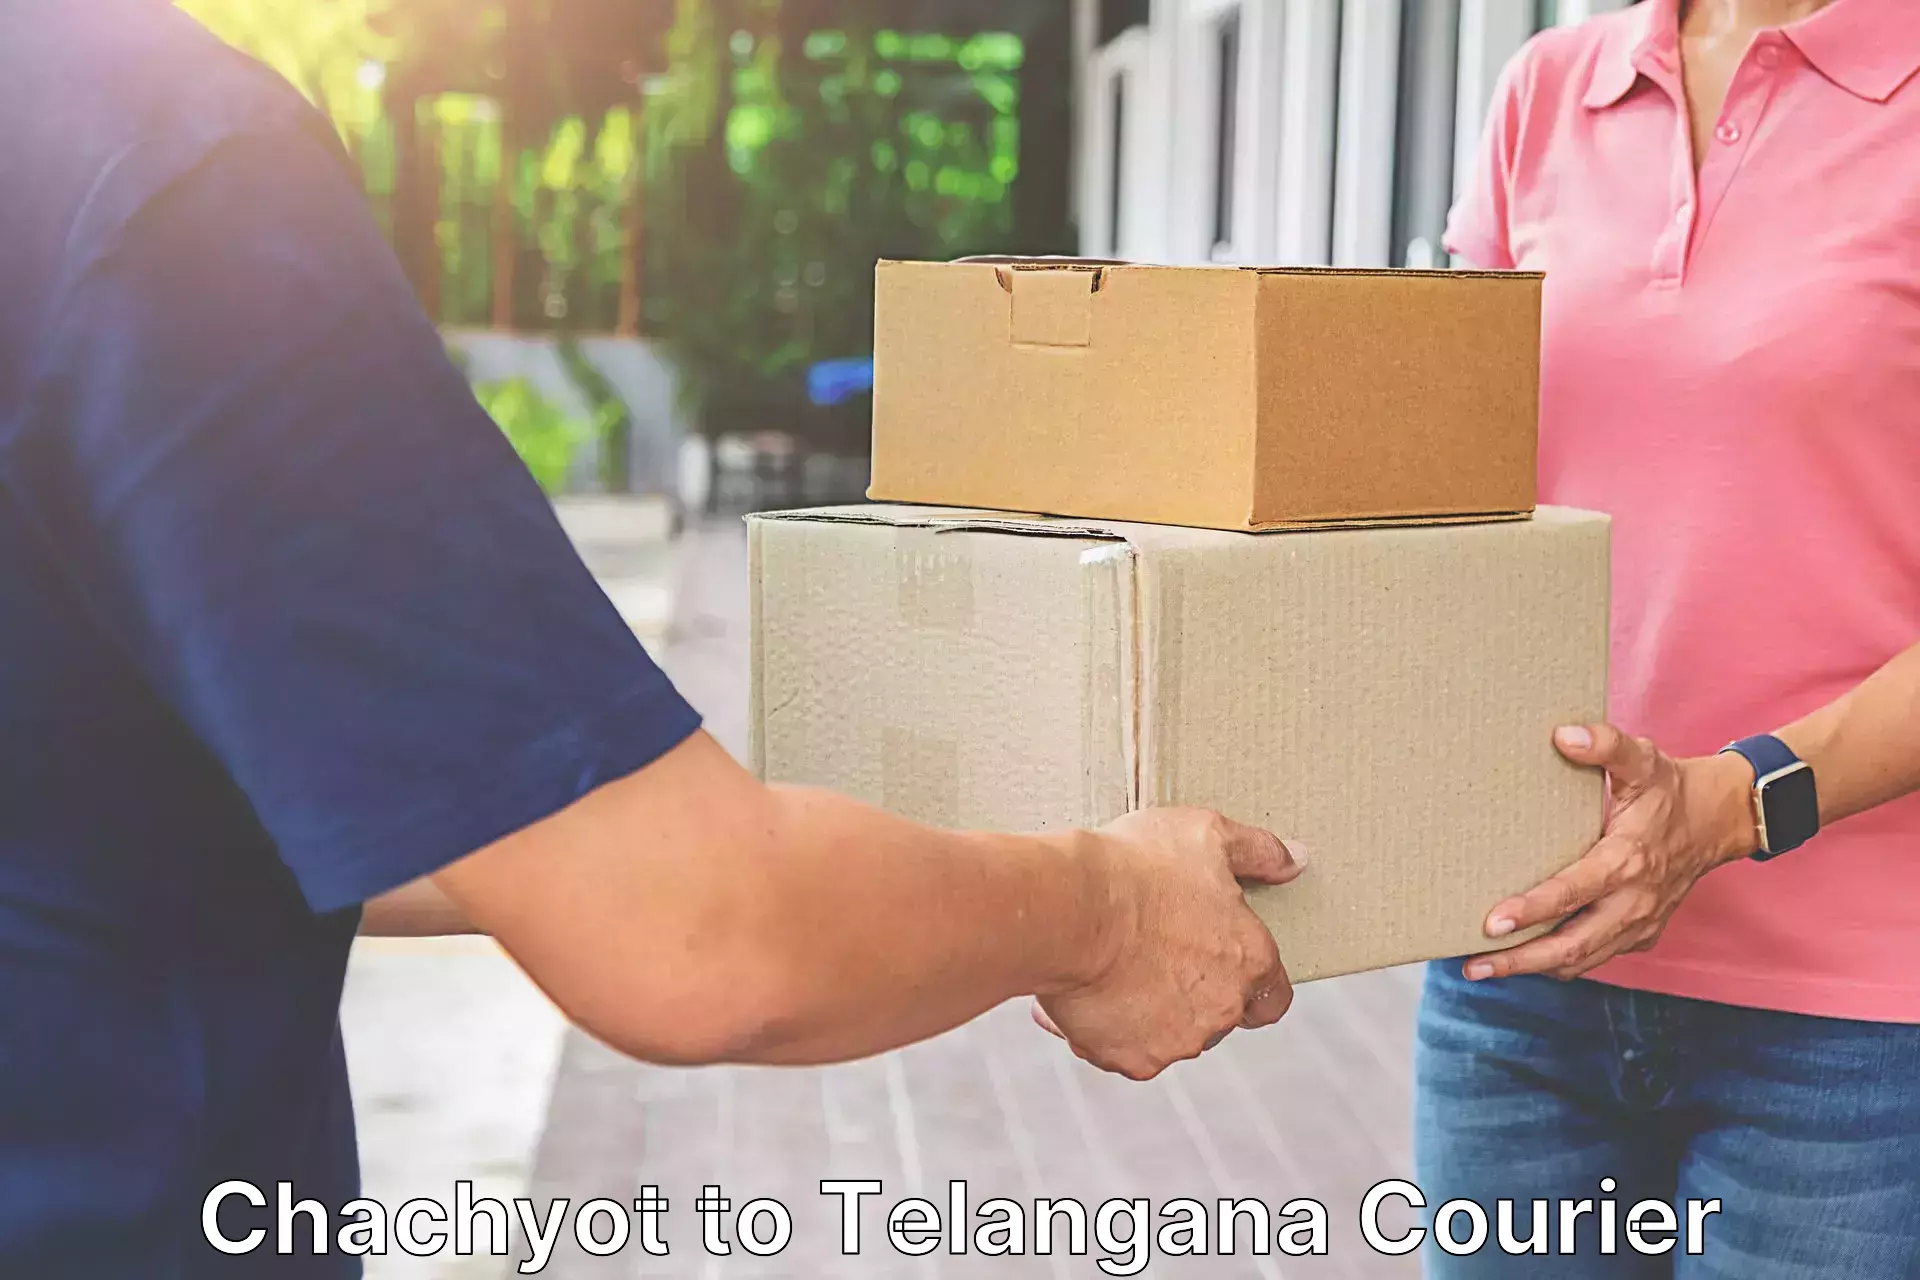 User-friendly courier app Chachyot to Telangana